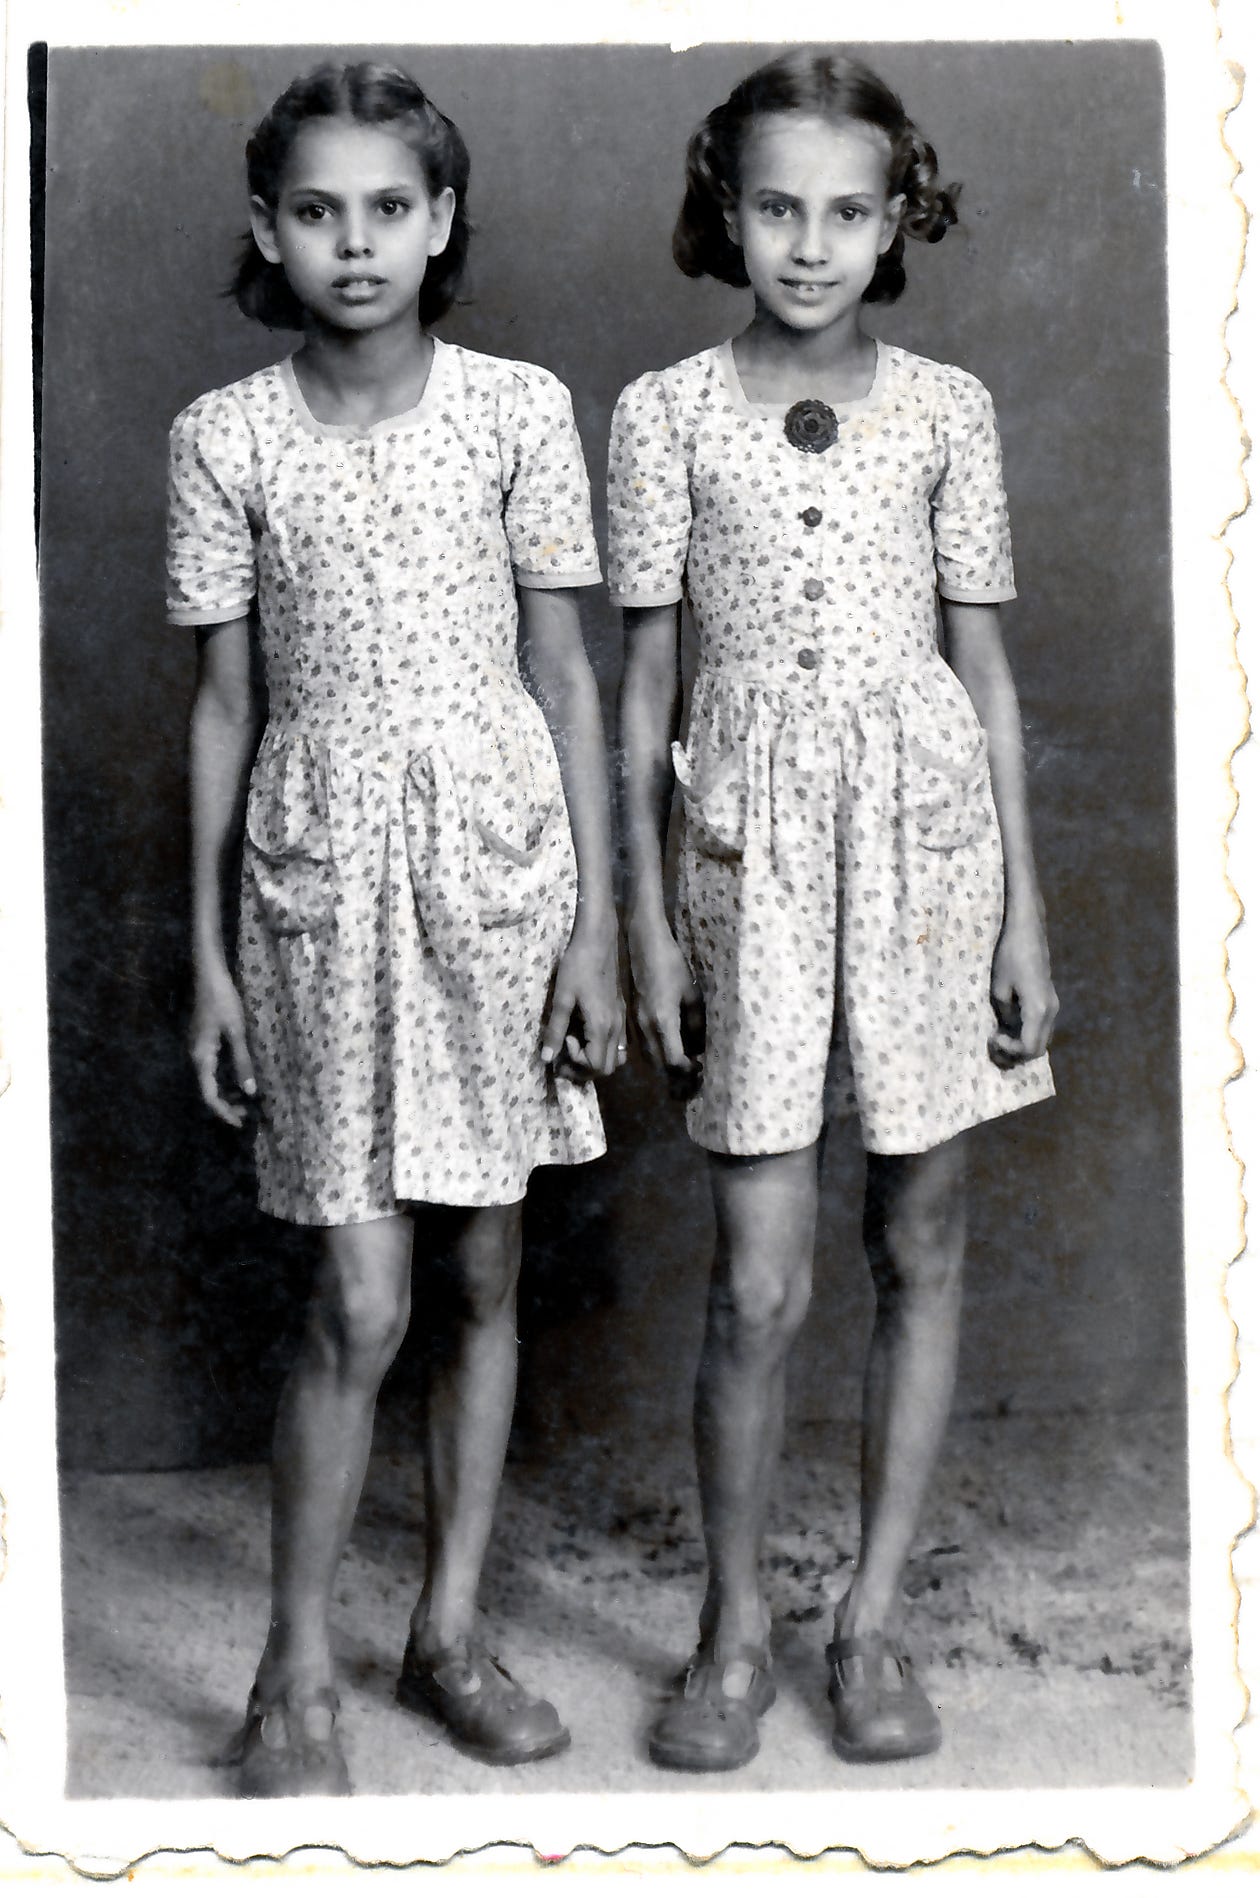 Photo taken in 1948 of two little girls, one solemn, one smiling, dressed in home-made floral print dresses.